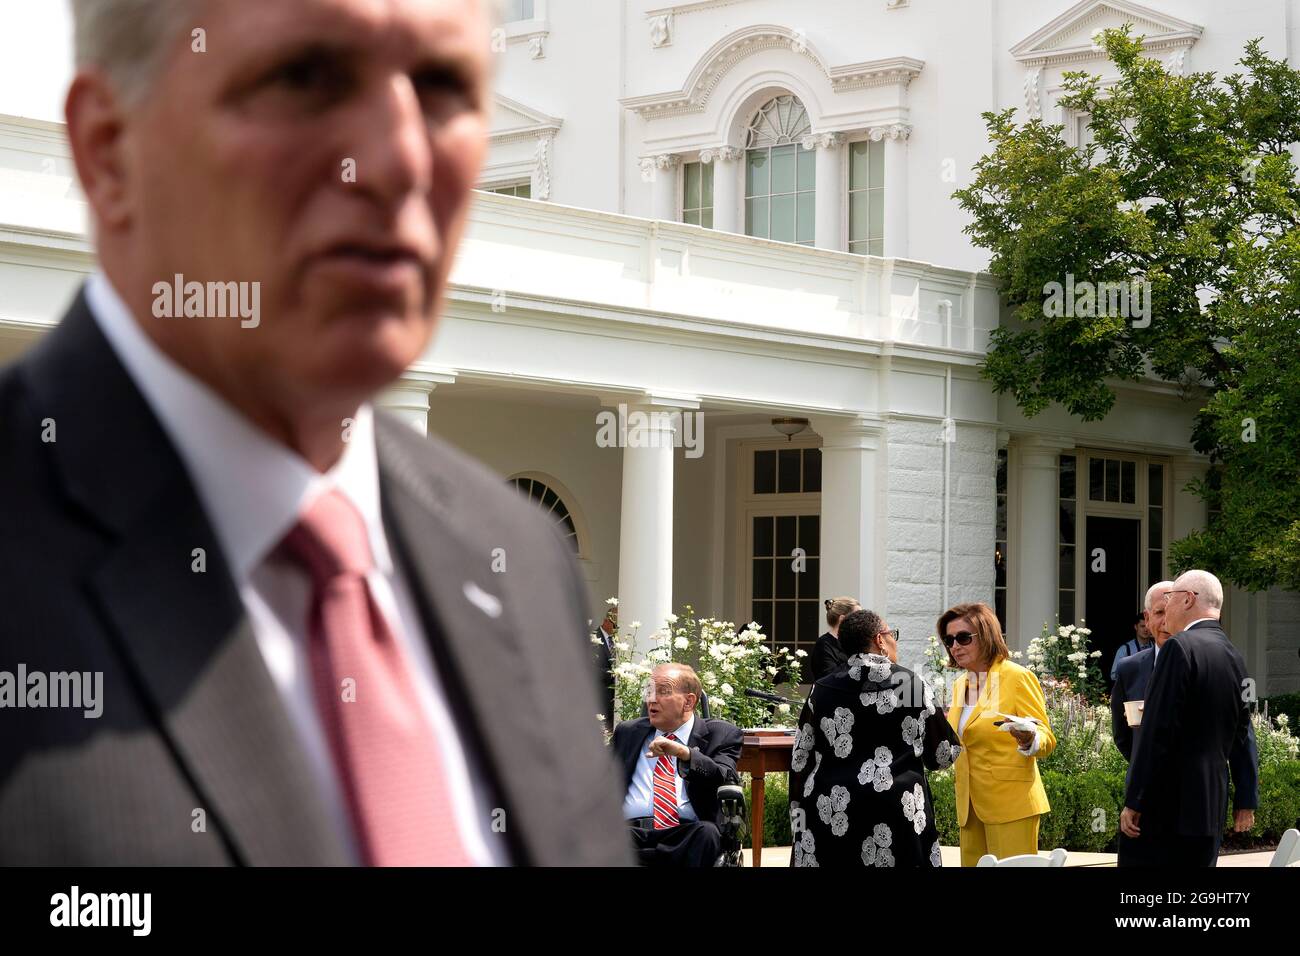 Speaker of the House Nancy Pelosi, a Democrat from California, center, speaks to Marcia Fudge, U.S. Secretary of Housing and Urban Development (HUD), as House Minority Leader Kevin McCarthy, a Republican from California, left, speaks to members of the media in the Rose Garden of the White House in Washington, DC, U.S., on Monday, July 26, 2021. The Biden administration is keeping foreign travel restrictions in place amid concern about rising Covid-19 case levels as the delta variant spreads. Photographer: Stefani Reynolds/Pool/Sipa USA Stock Photo